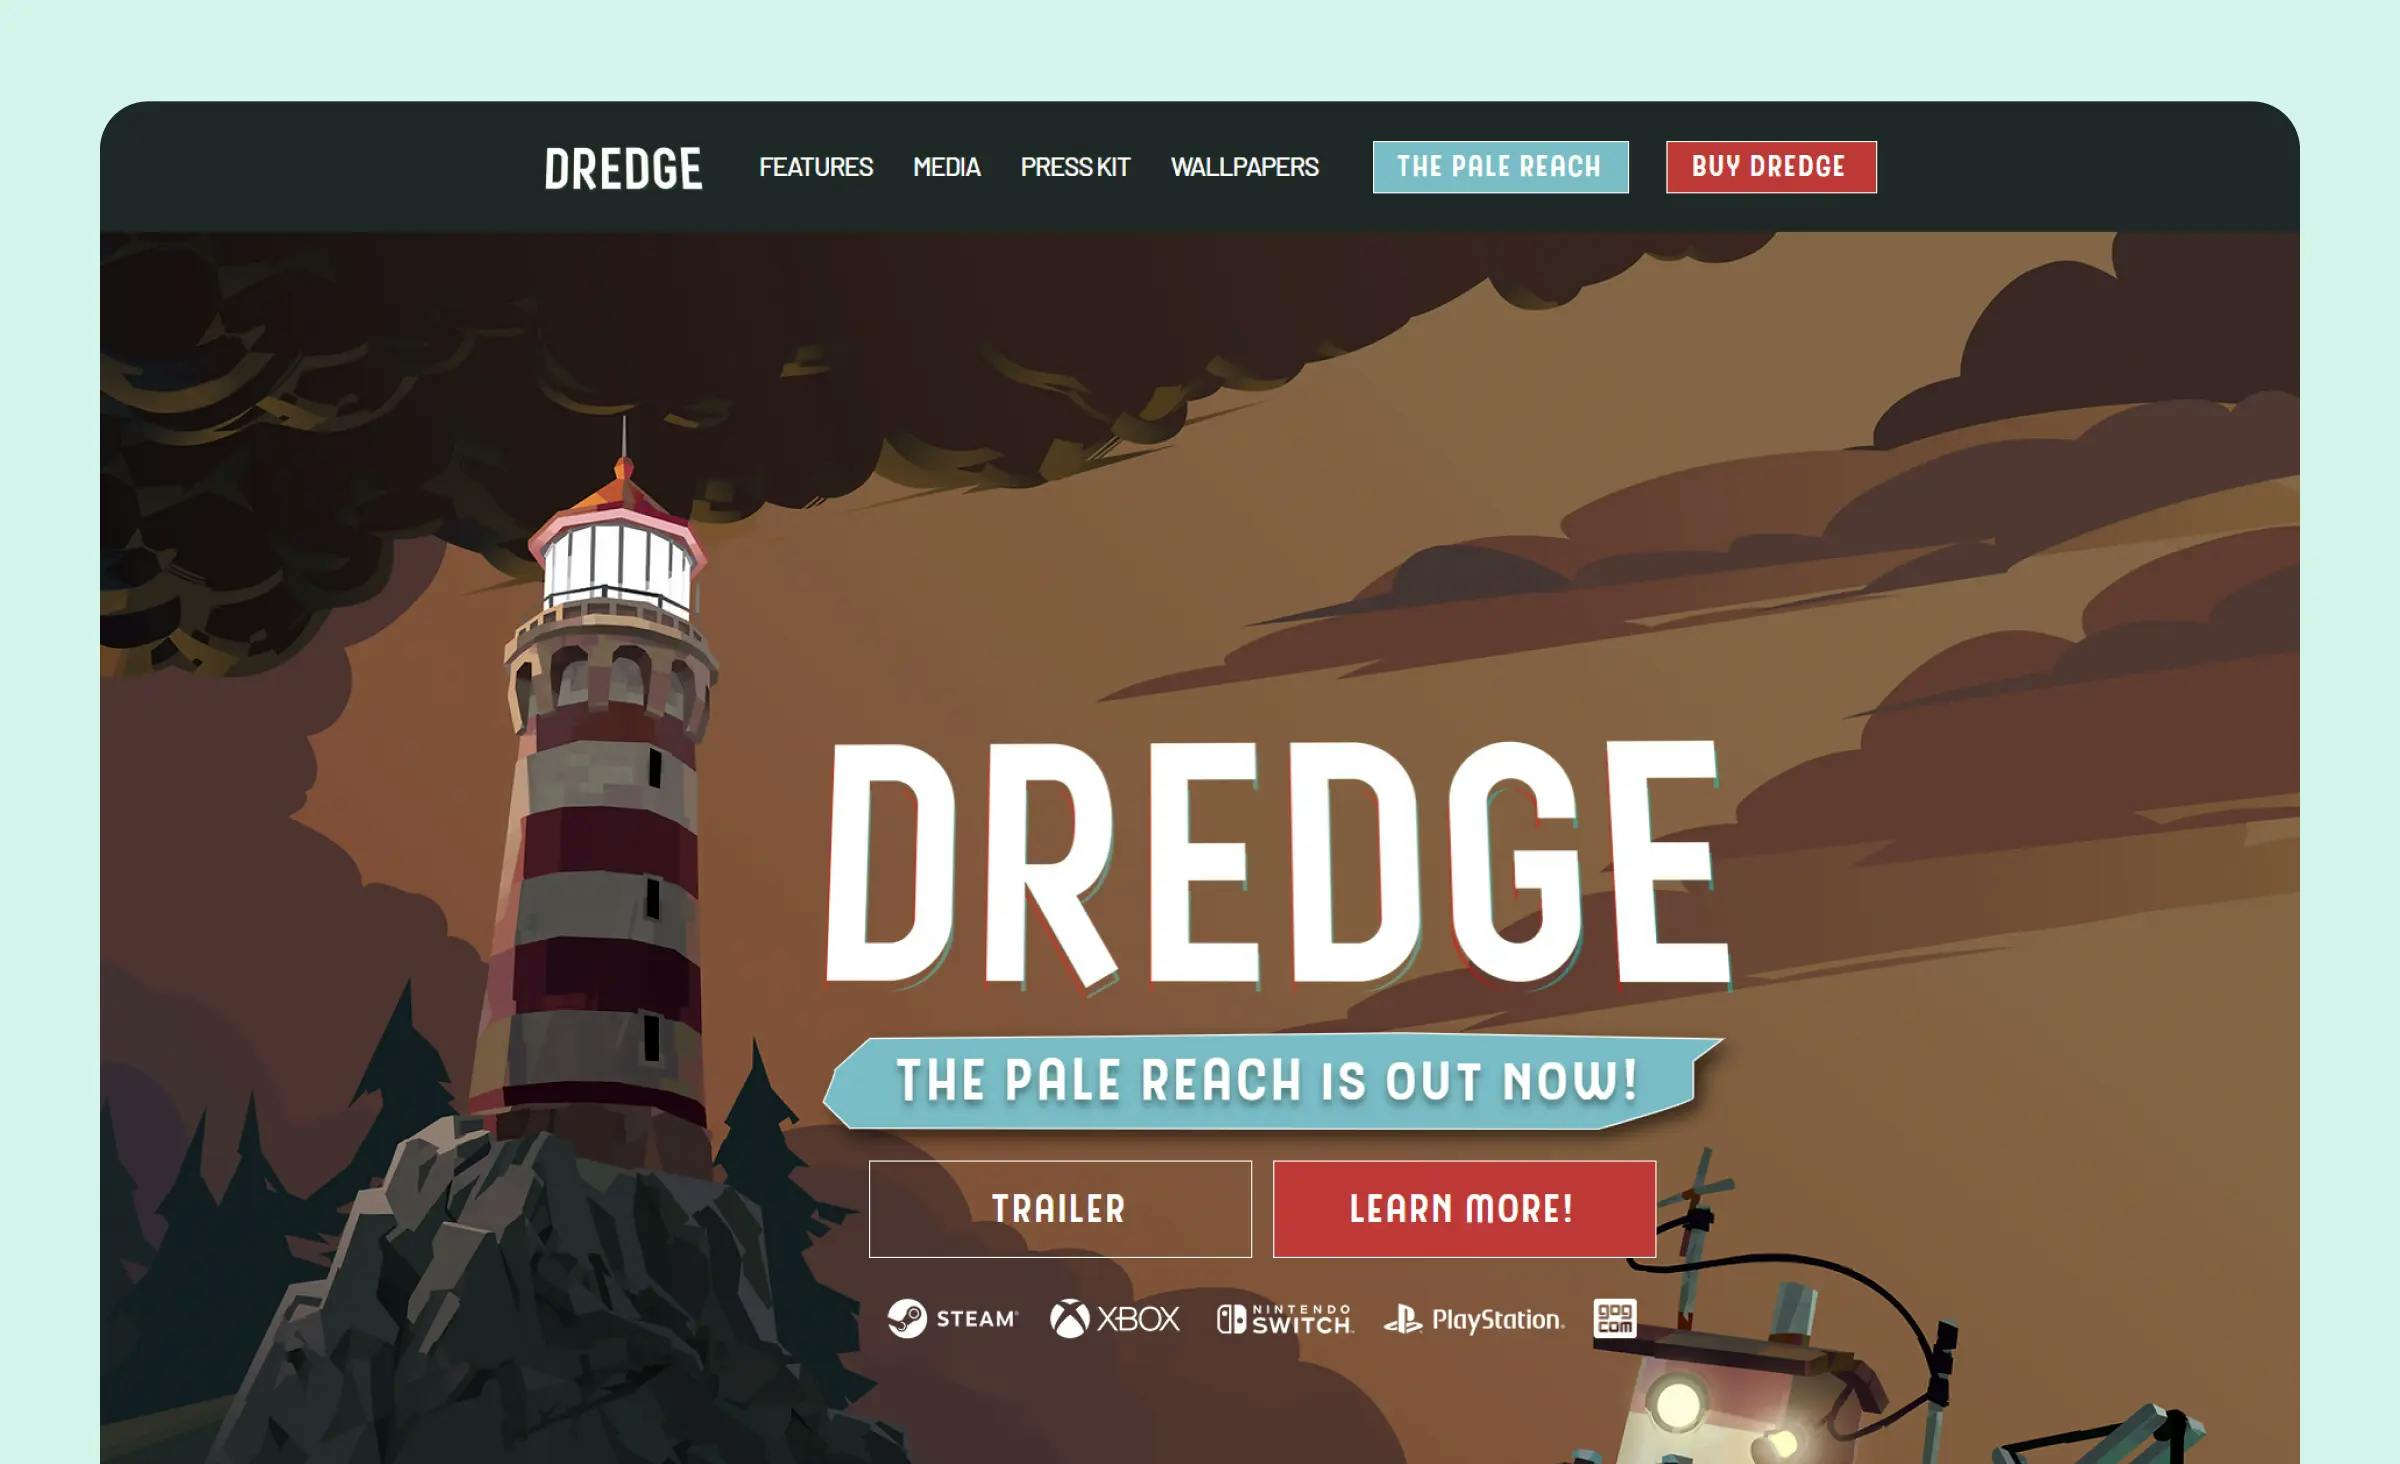 The landing page for the Dredge game features a visual of a lighthouse, with the game’s title, "Dredge," written in large font above it. Below the title are two buttons: "Trailer" and "Learn More." In the menu above the lighthouse, there are several options: "Features," "Media," "Press Kit," and "Wallpapers." There are also two buttons on the right side of the menu: "The Pale Reach" and "Buy Dredge." A screenshot of the Dredge game shows how to build a game landing page at its best.